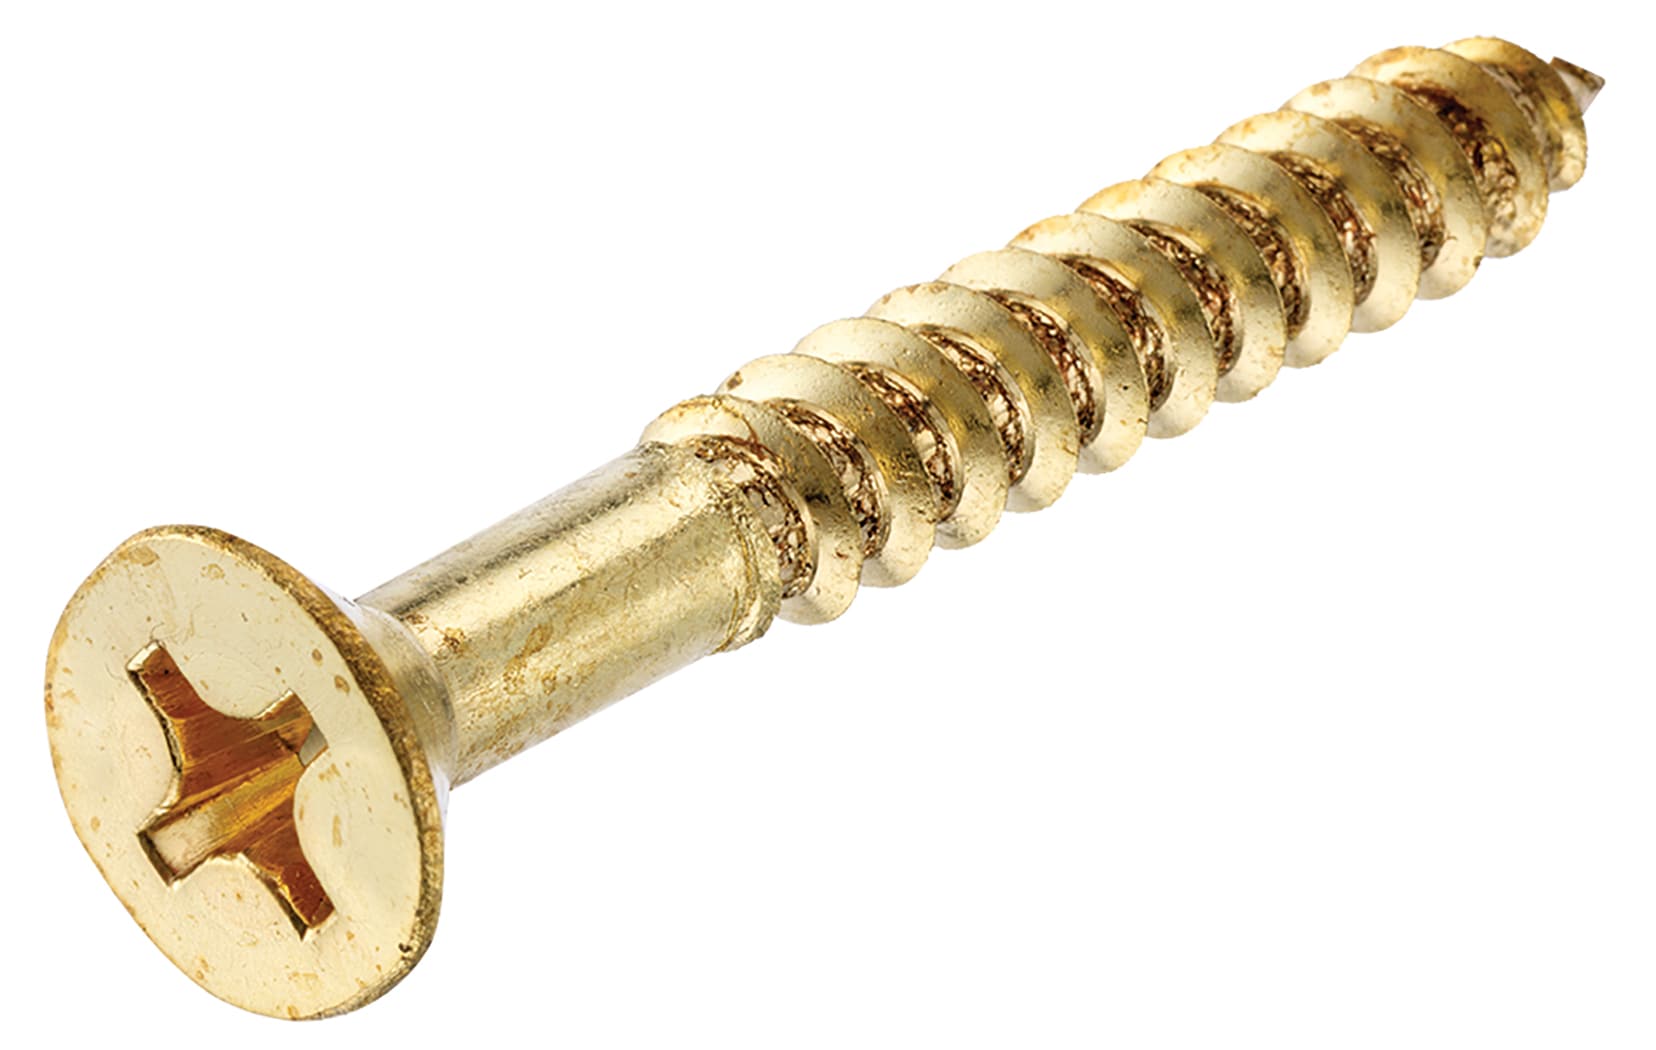 #4 x 3/4 Inch Brass Flat Head Slotted Wood Screws - 25 Pack